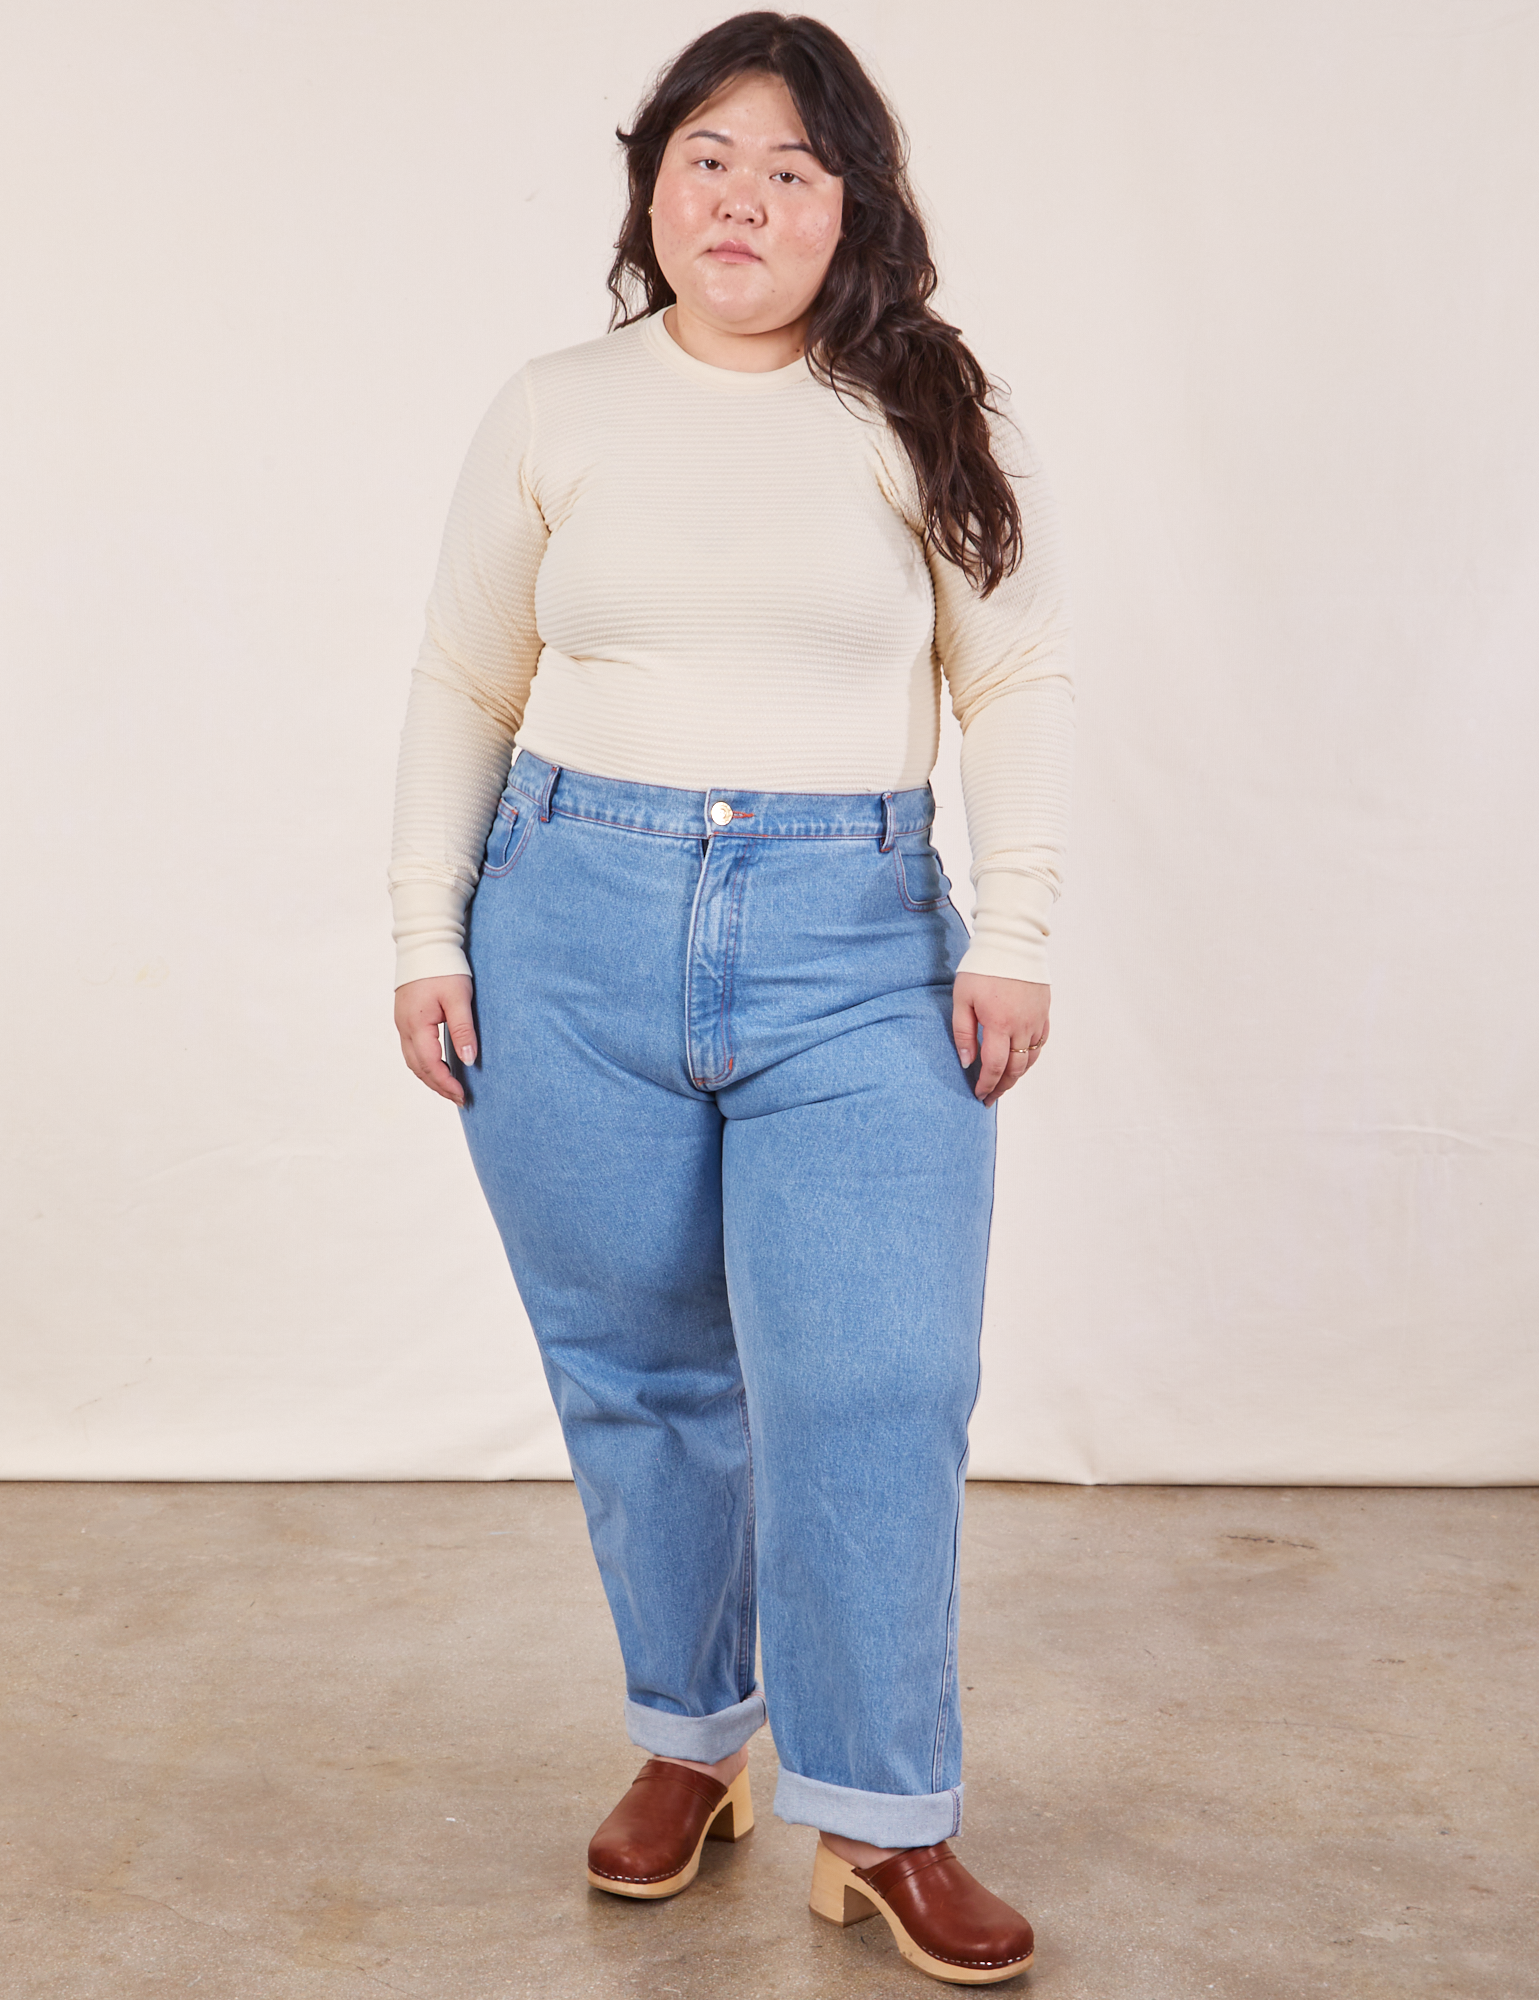 Ashley is wearing Honeycomb Thermal in Vintage Tee Off-White tucked into light wash Frontier Jeans